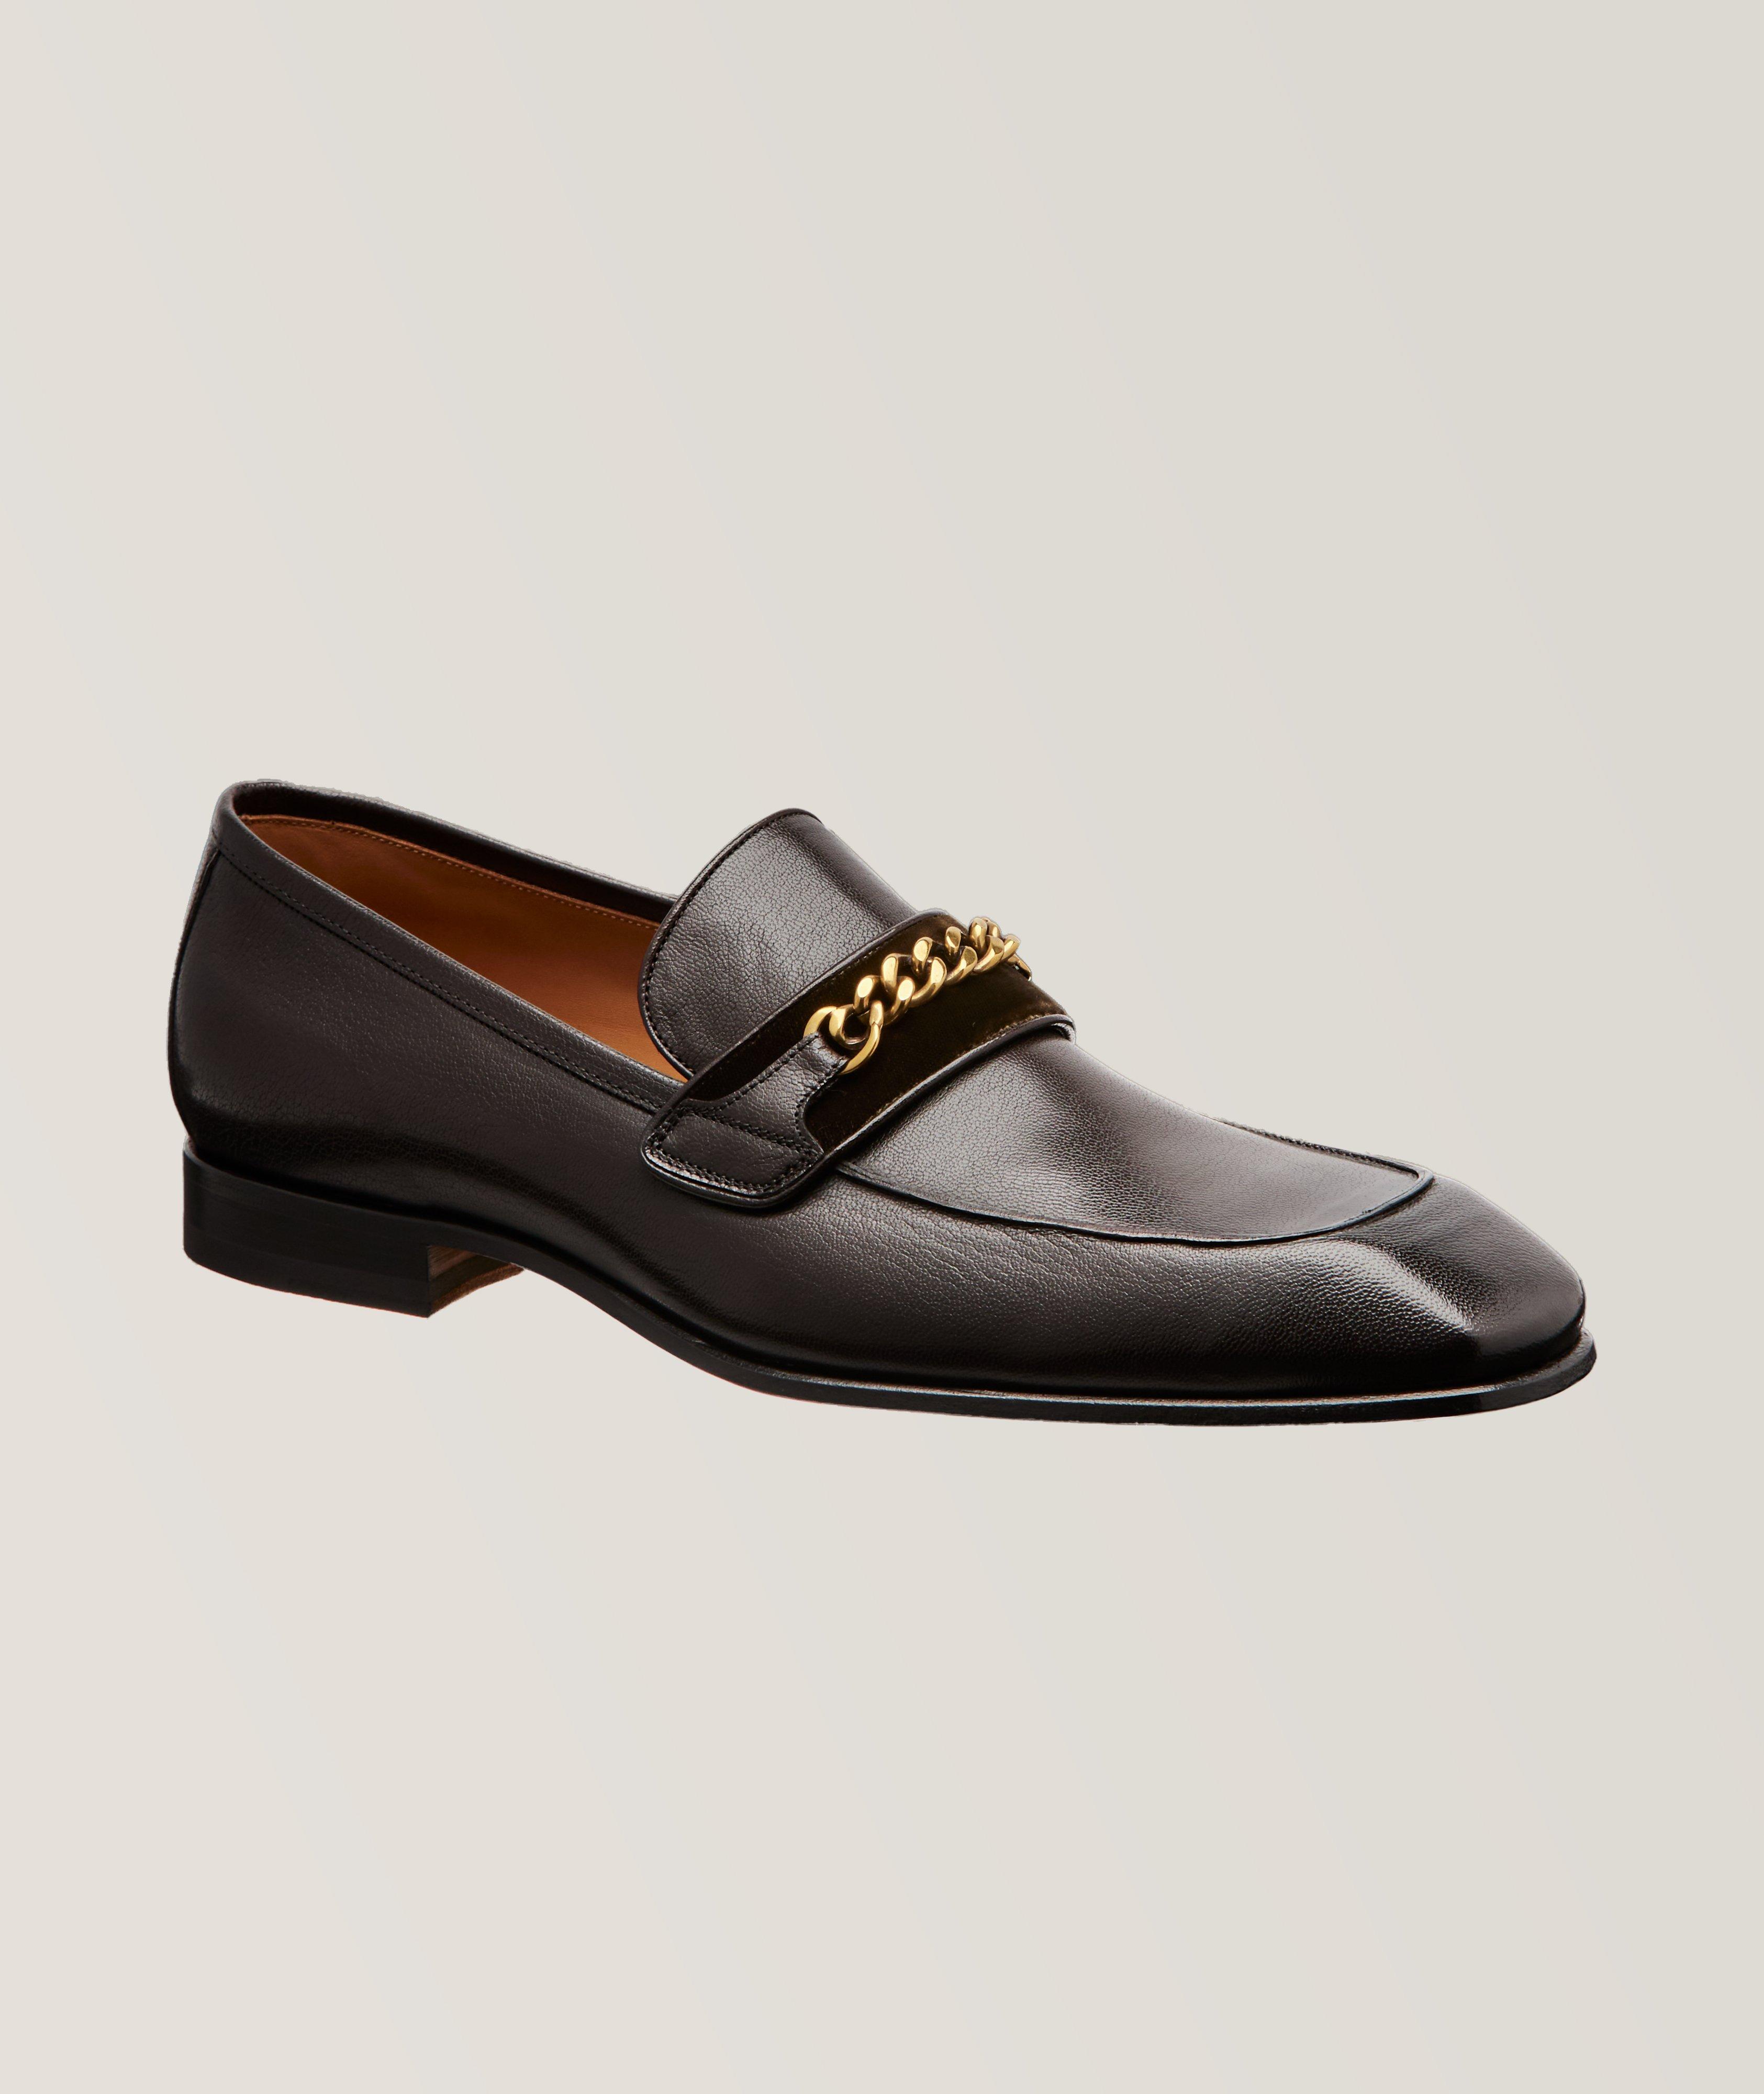 Bailey Grained Chain Leather Loafers image 0